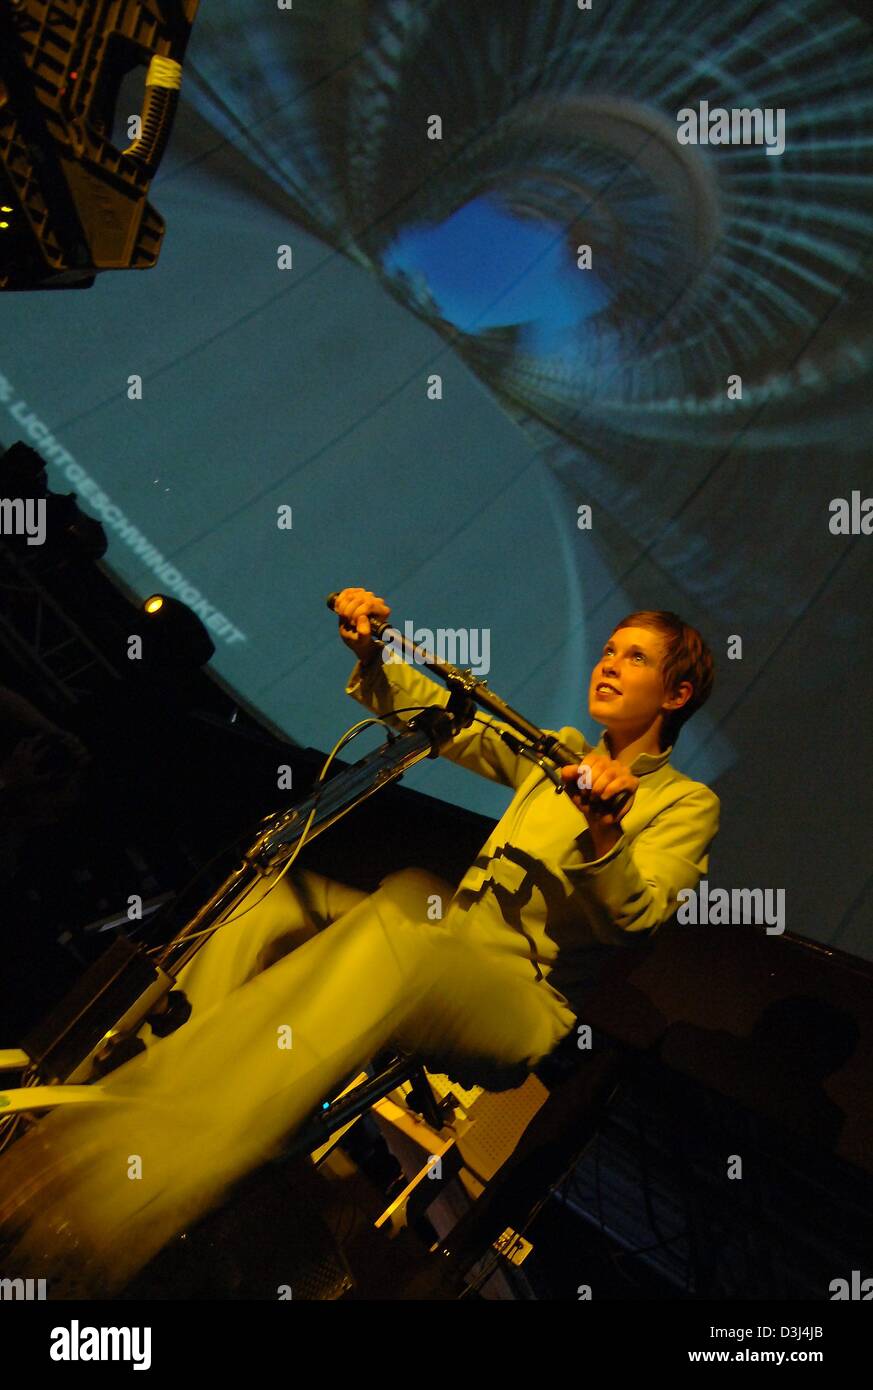 (dpa) - Female dancer Peggy Ziehr sits on a modified trim bike during the dress rehearsal of the cross media opera 'C - the speed of light' in Berlin, Germany, Friday 10 June 2005. The opera about the life of Albert Einstein has public premiere on Saturday, 11 June 2005. Stock Photo